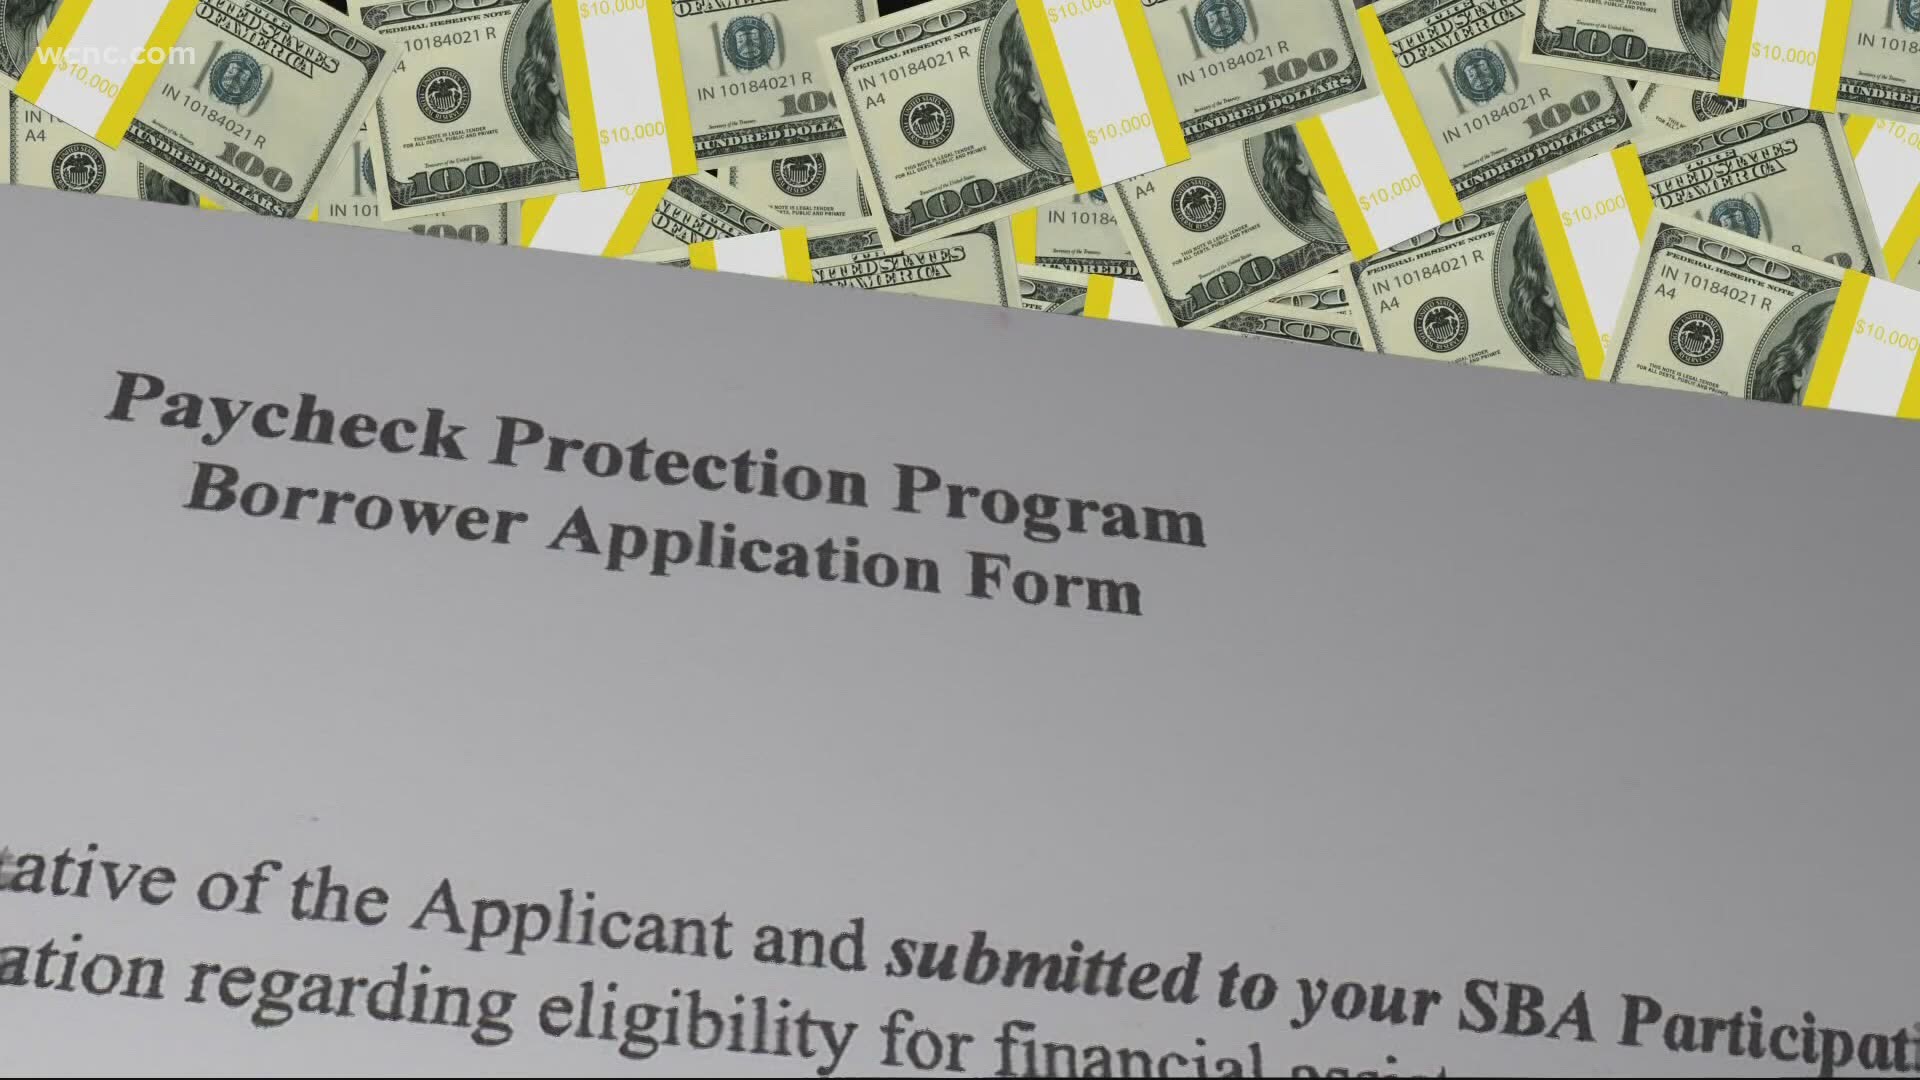 Instead of a $149,000 Paycheck Protection Program loan going to a small business in need, federal investigators say the PPP loan ended up in a teen's bank account.